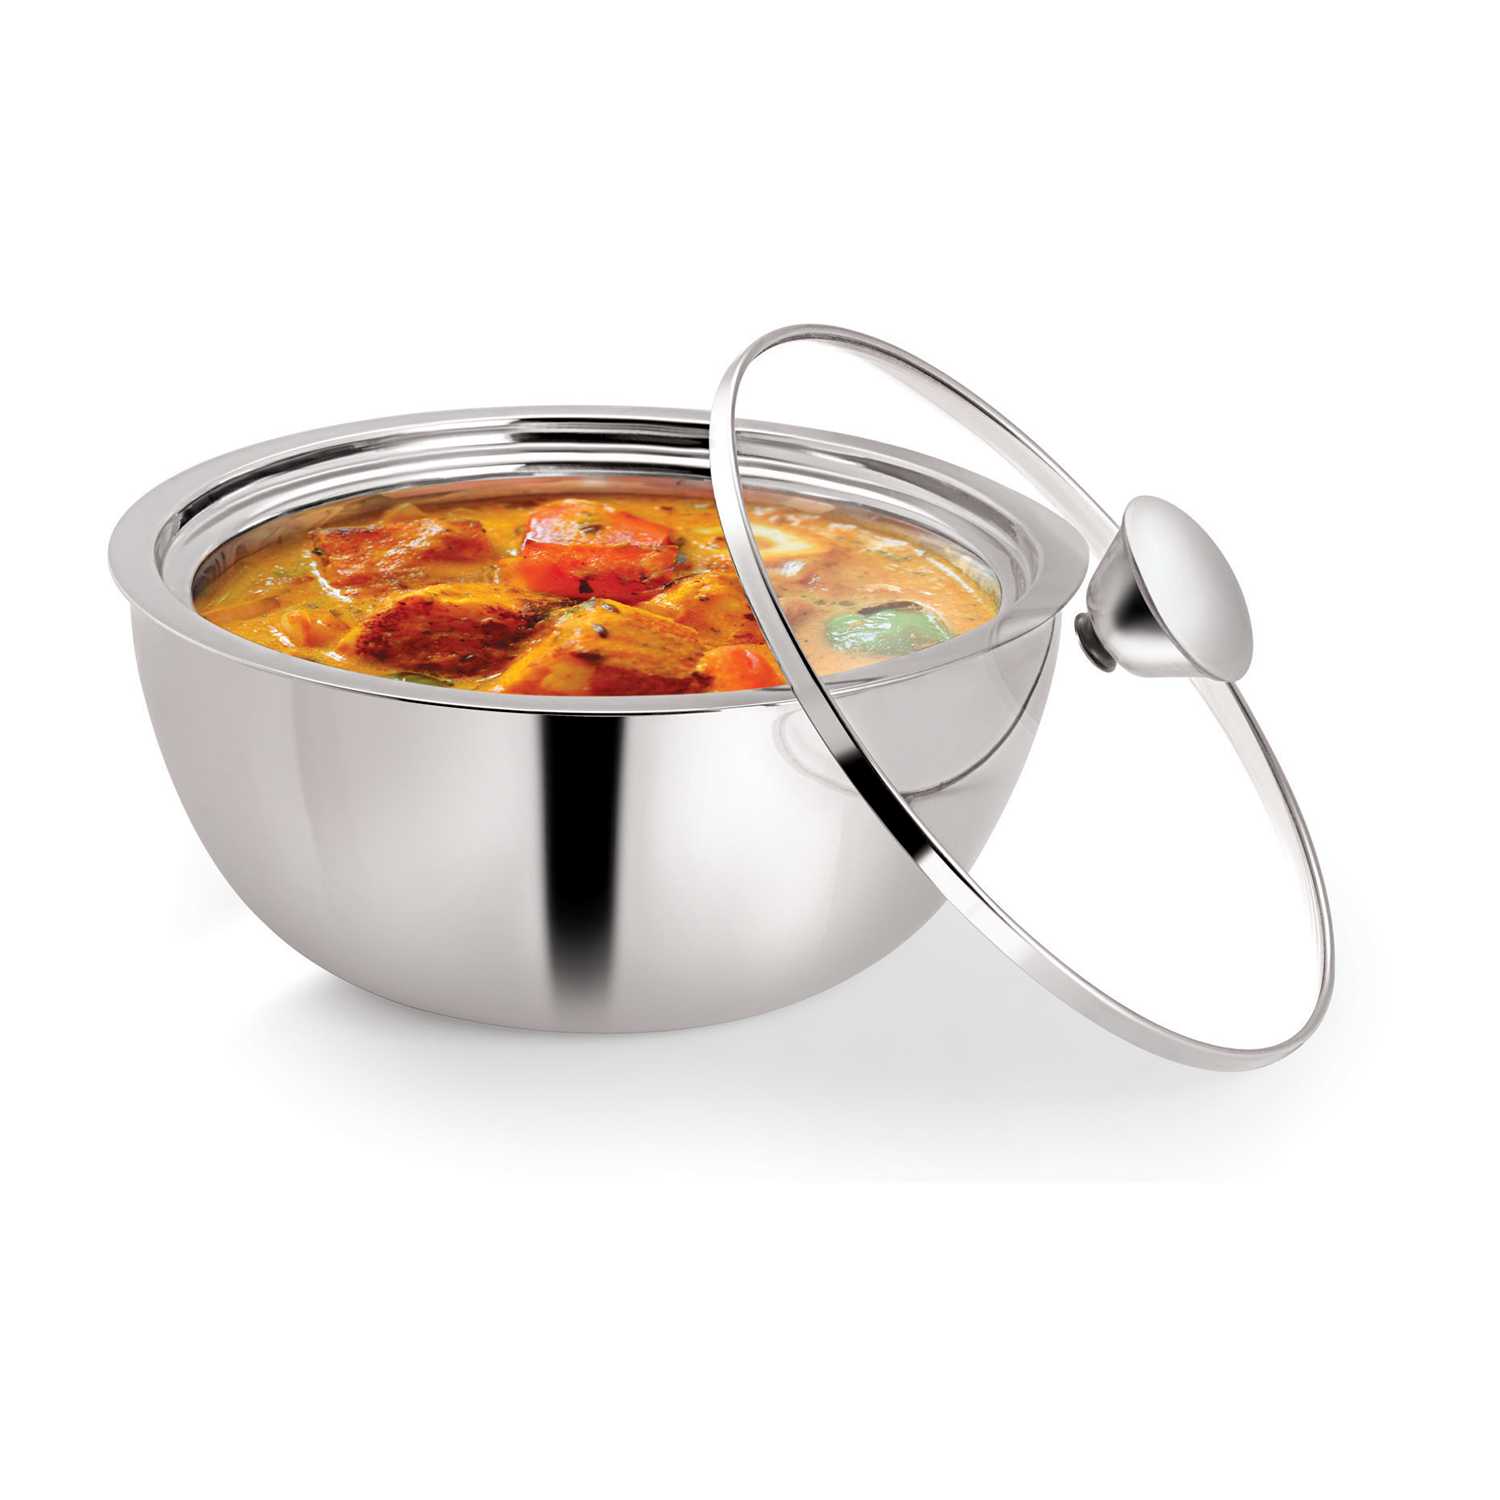 NanoNine Gravy Pot Double 500 ml Wall Insulated Stainless Steel Serve Fresh Casserole with Glass Lid.